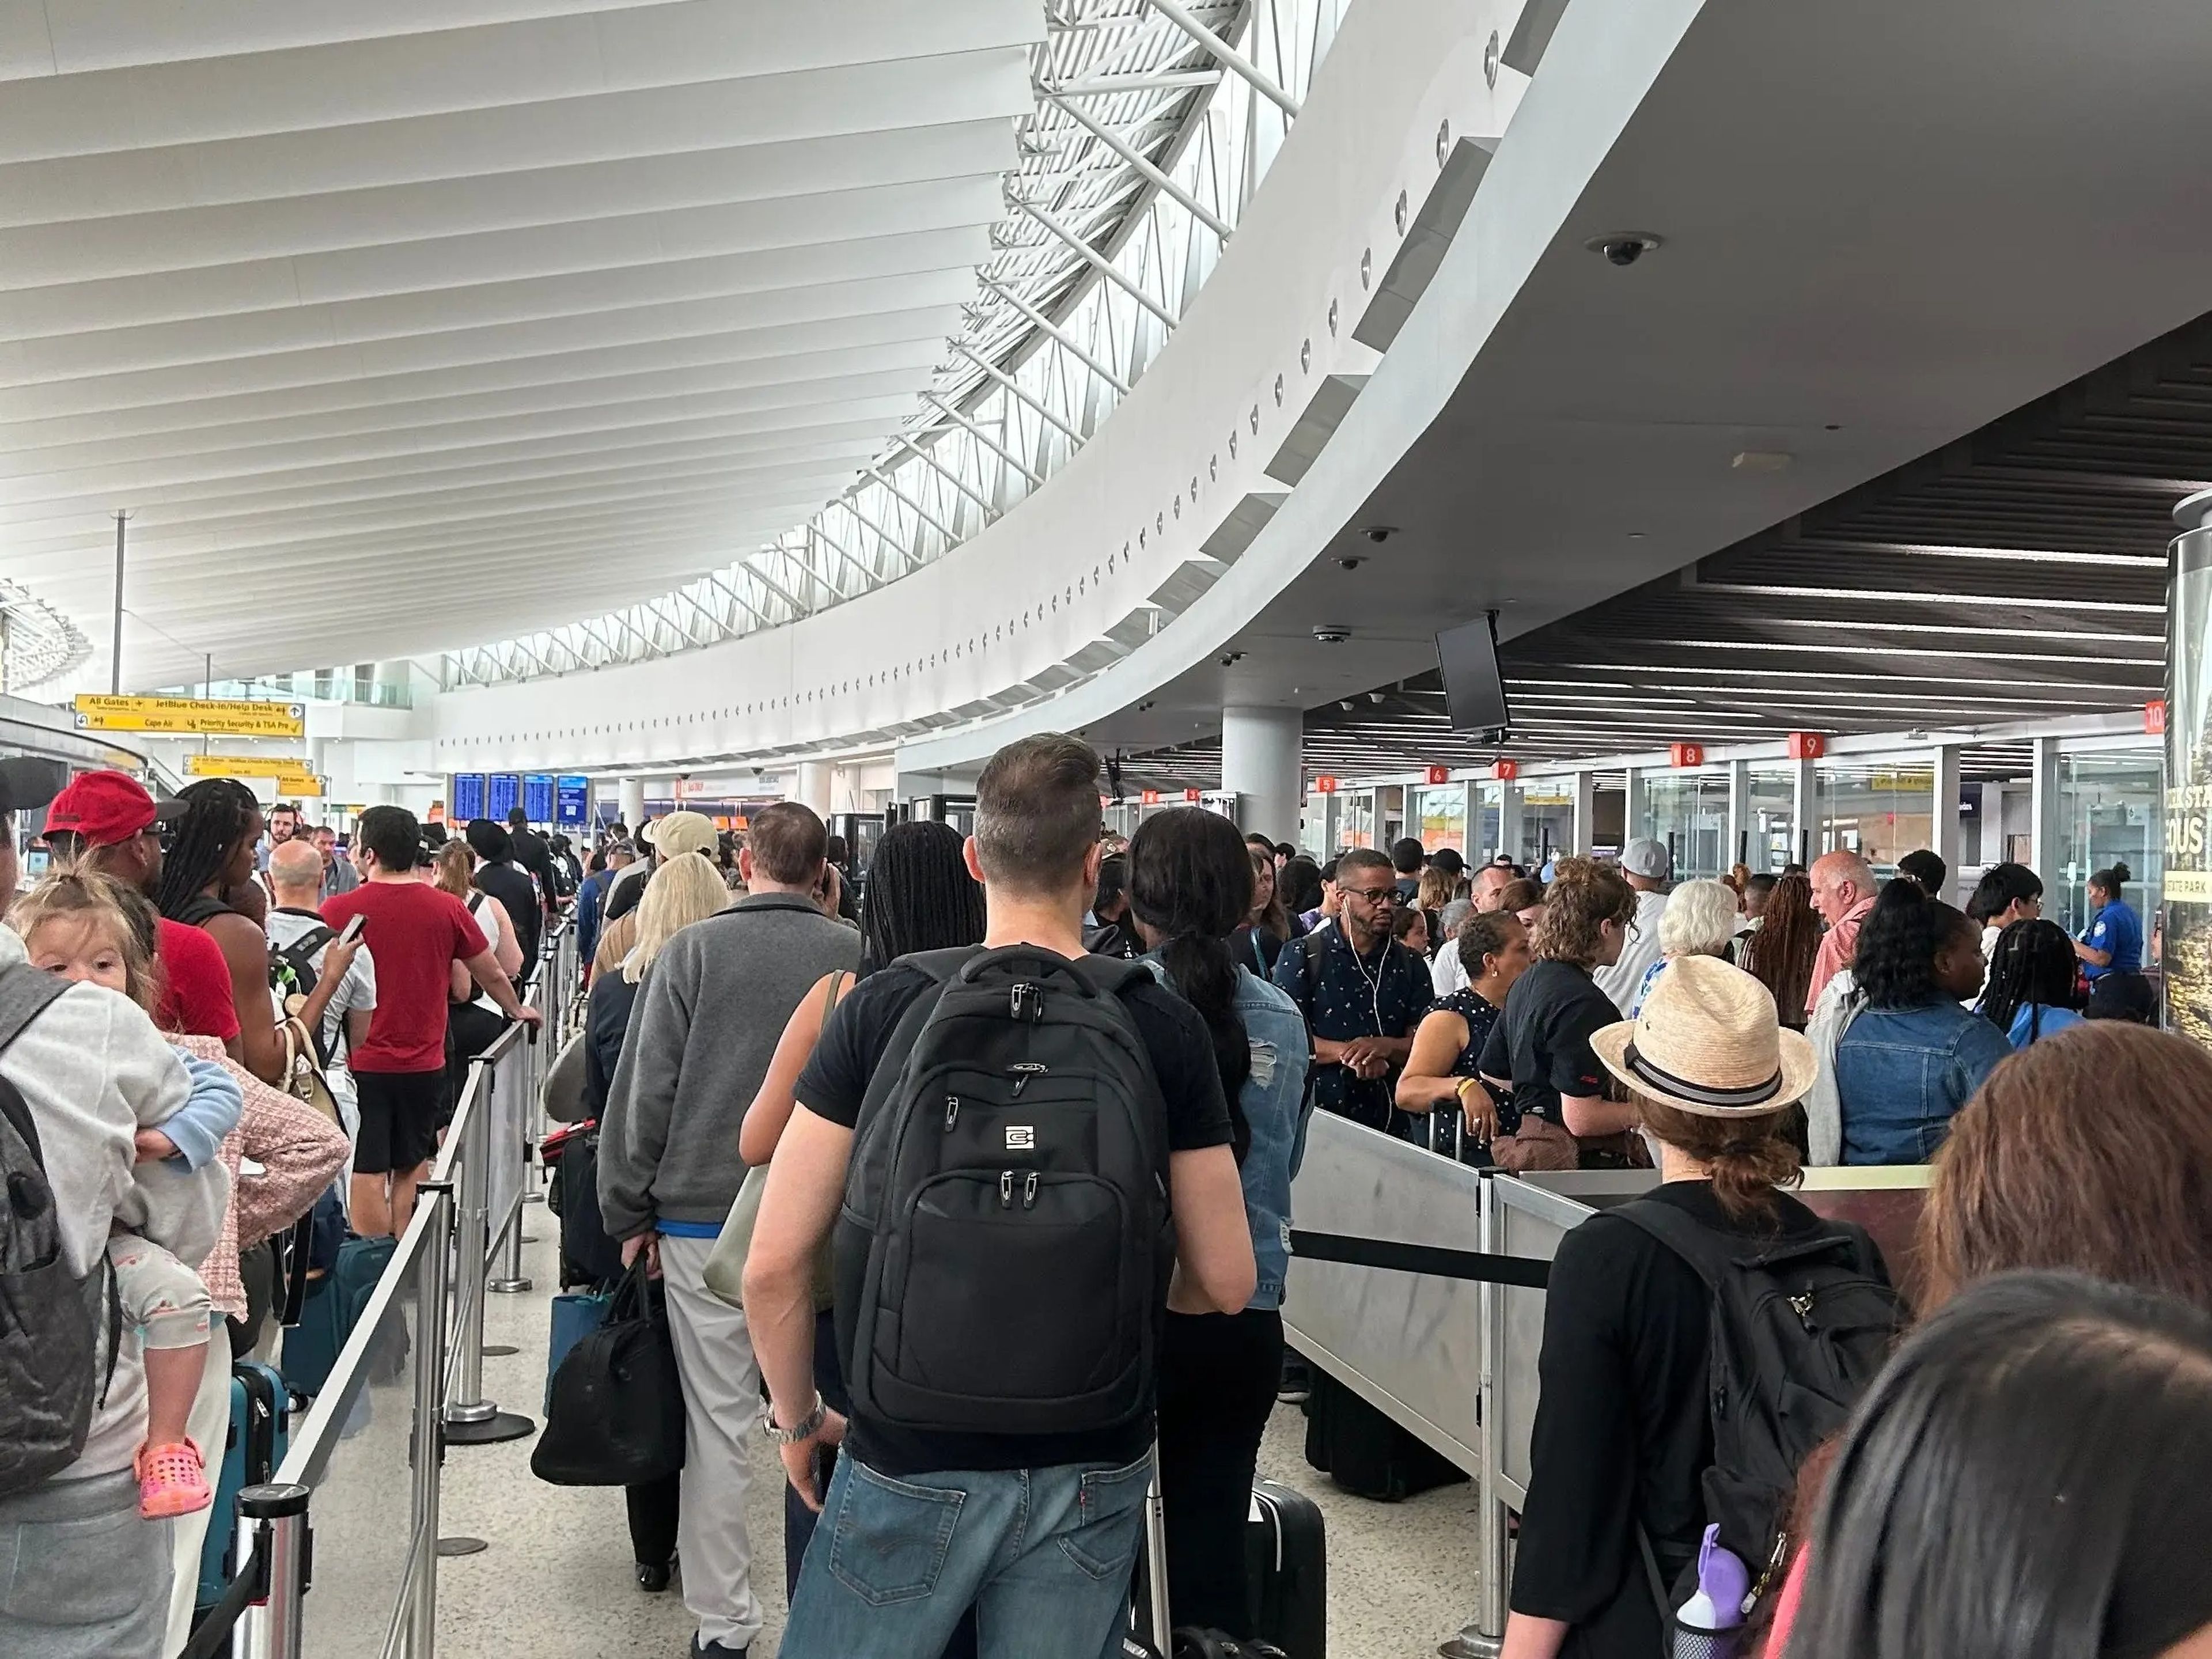 A line for priority security at JFK.